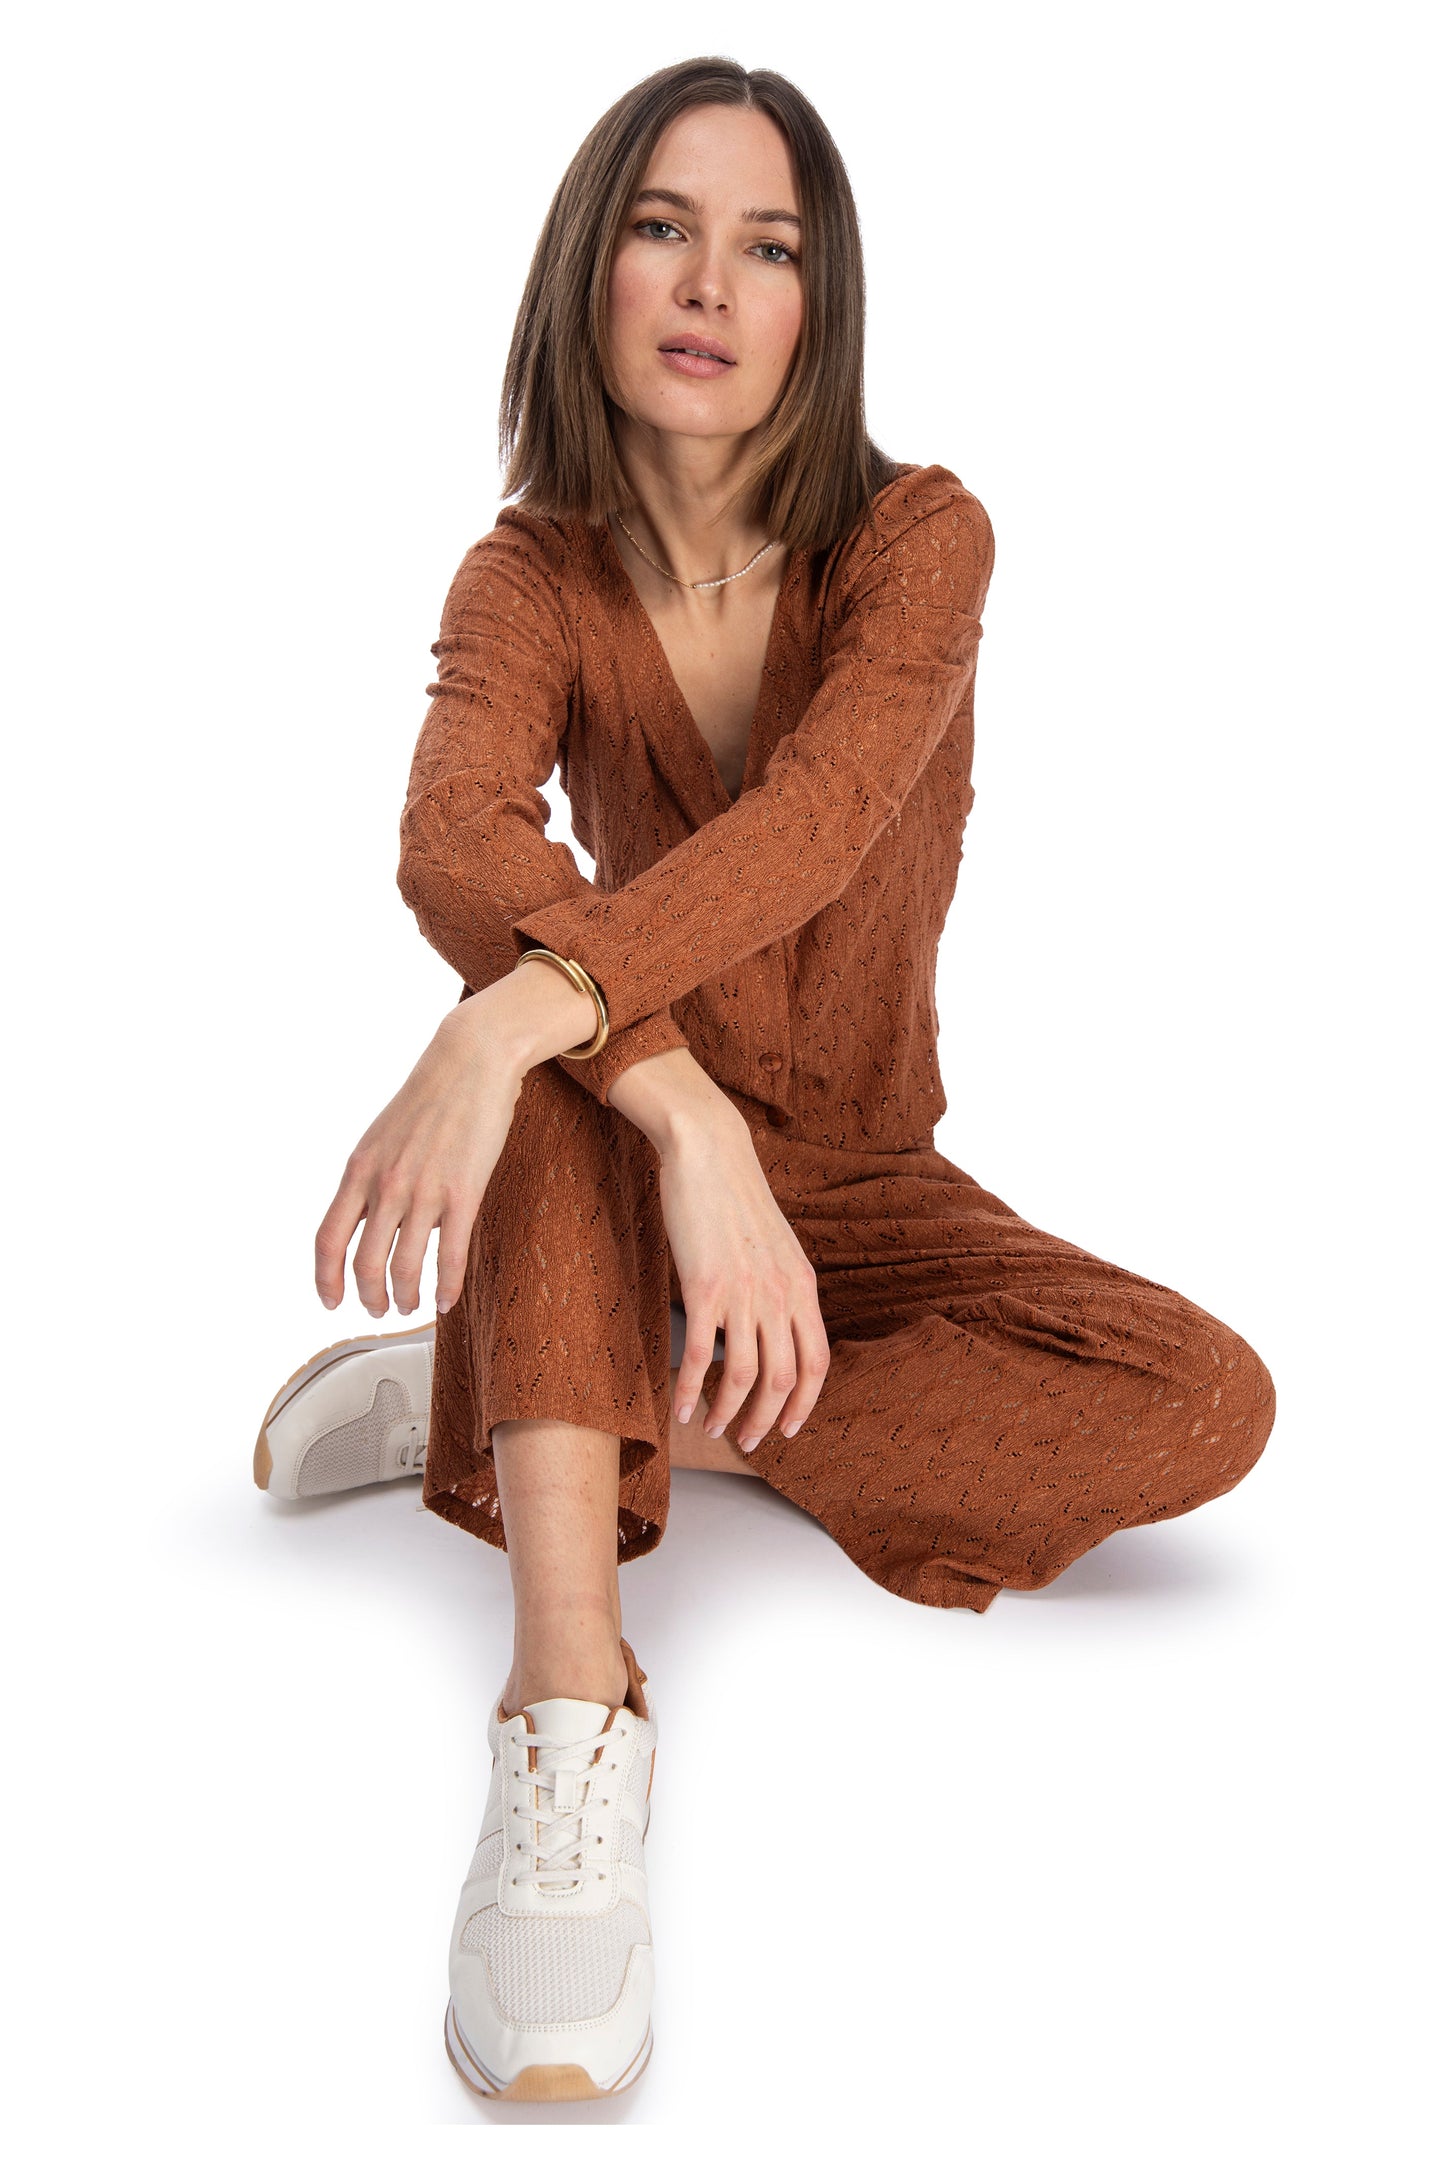 A woman in a textured brown dress with a relaxed pose sits against a white background, exuding a casual, confident style complemented by trendy white sneakers and her B Collection by Bobeau LS Crop Bttn Cardigan.